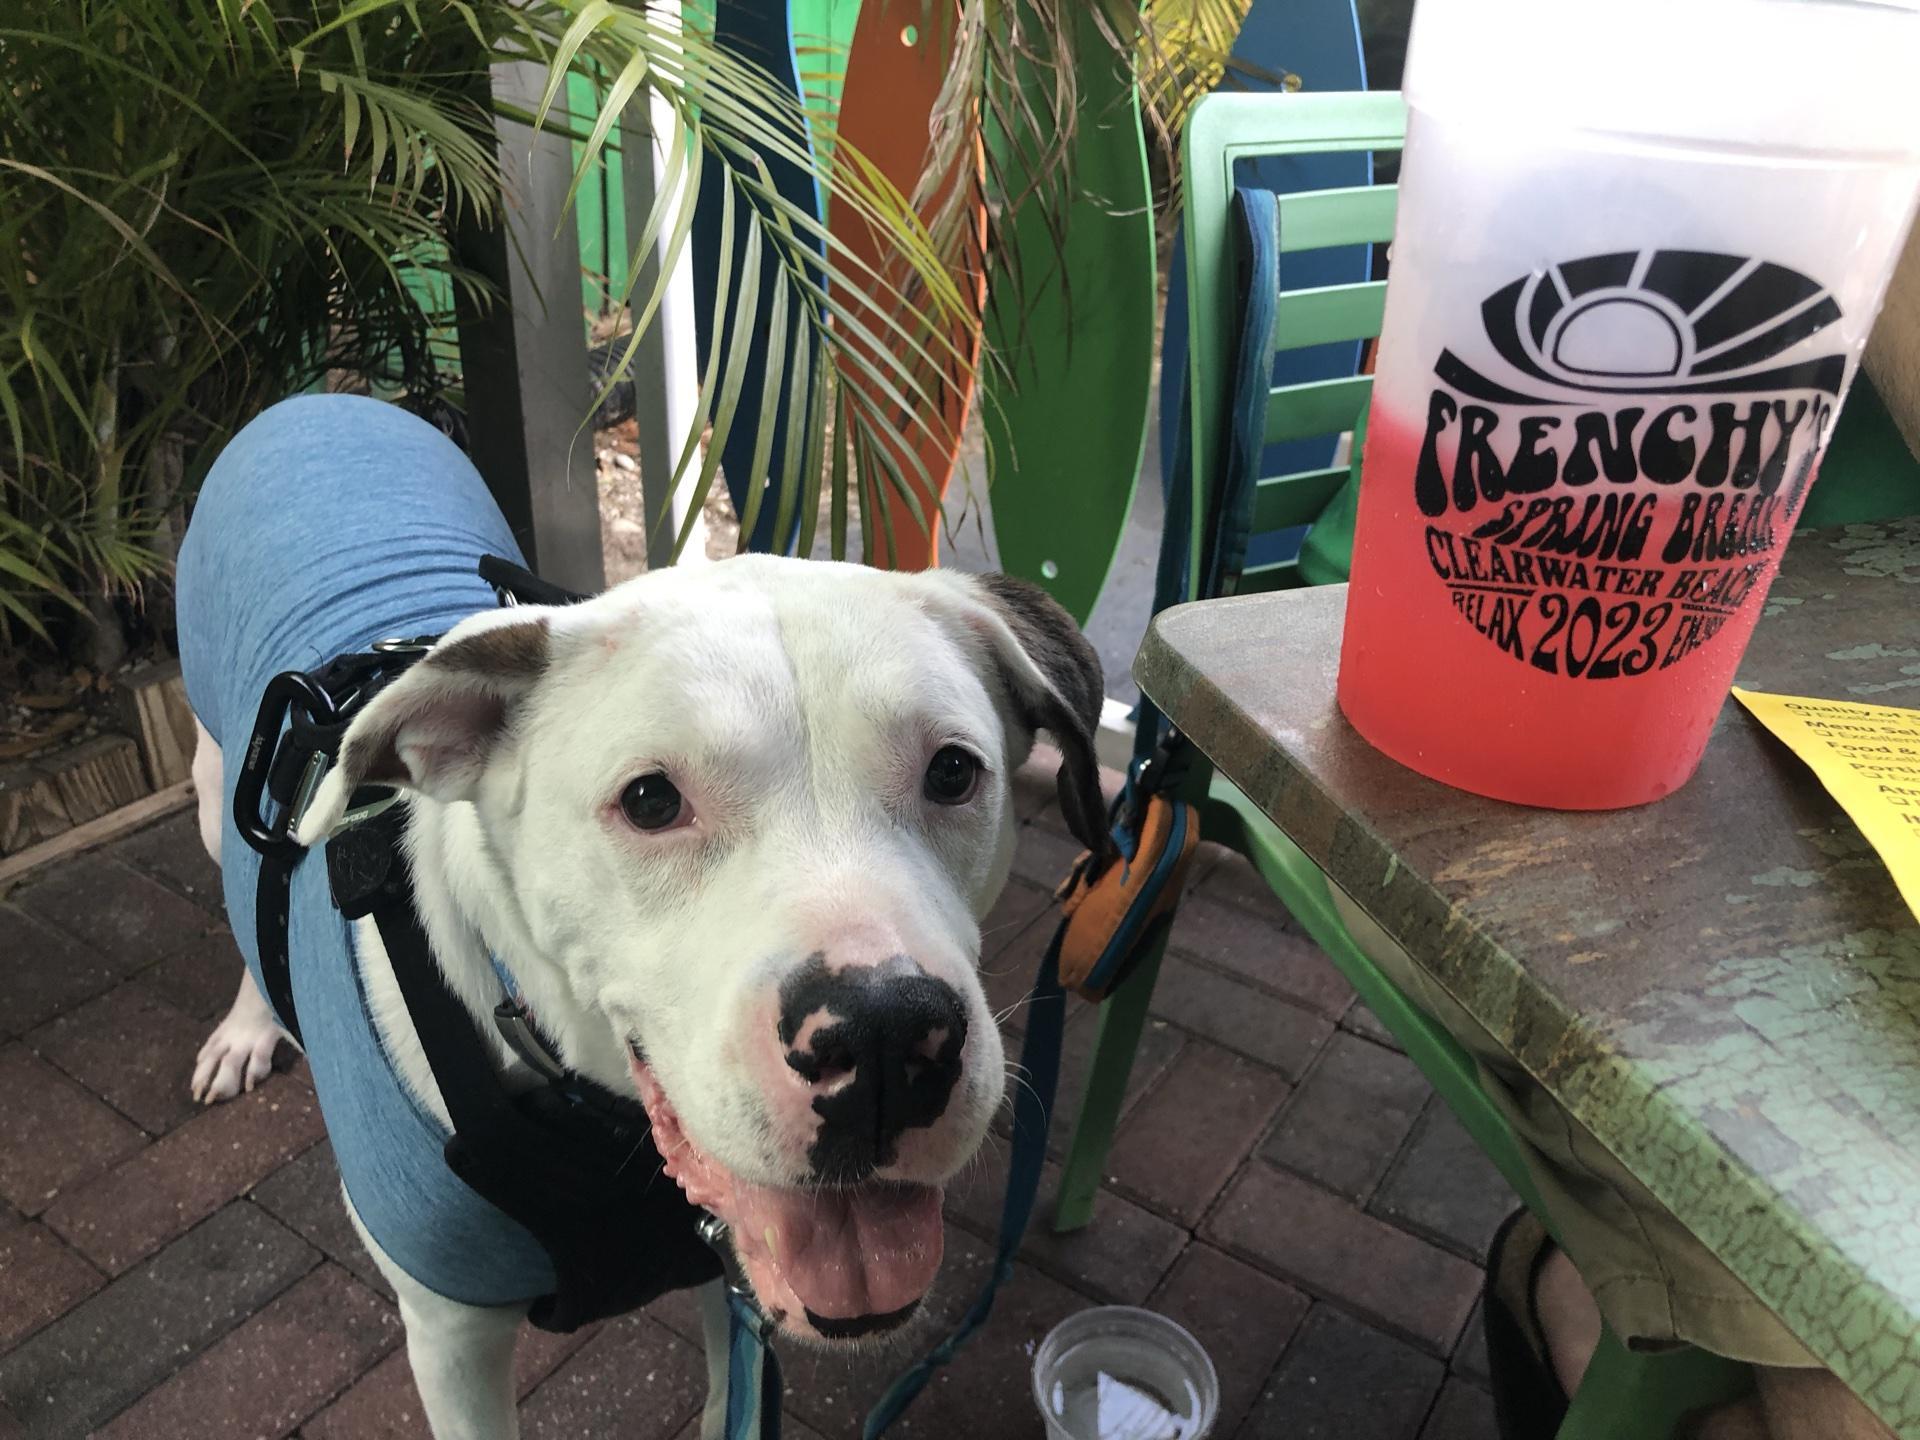 Pet Friendly Frenchy's Saltwater Cafe